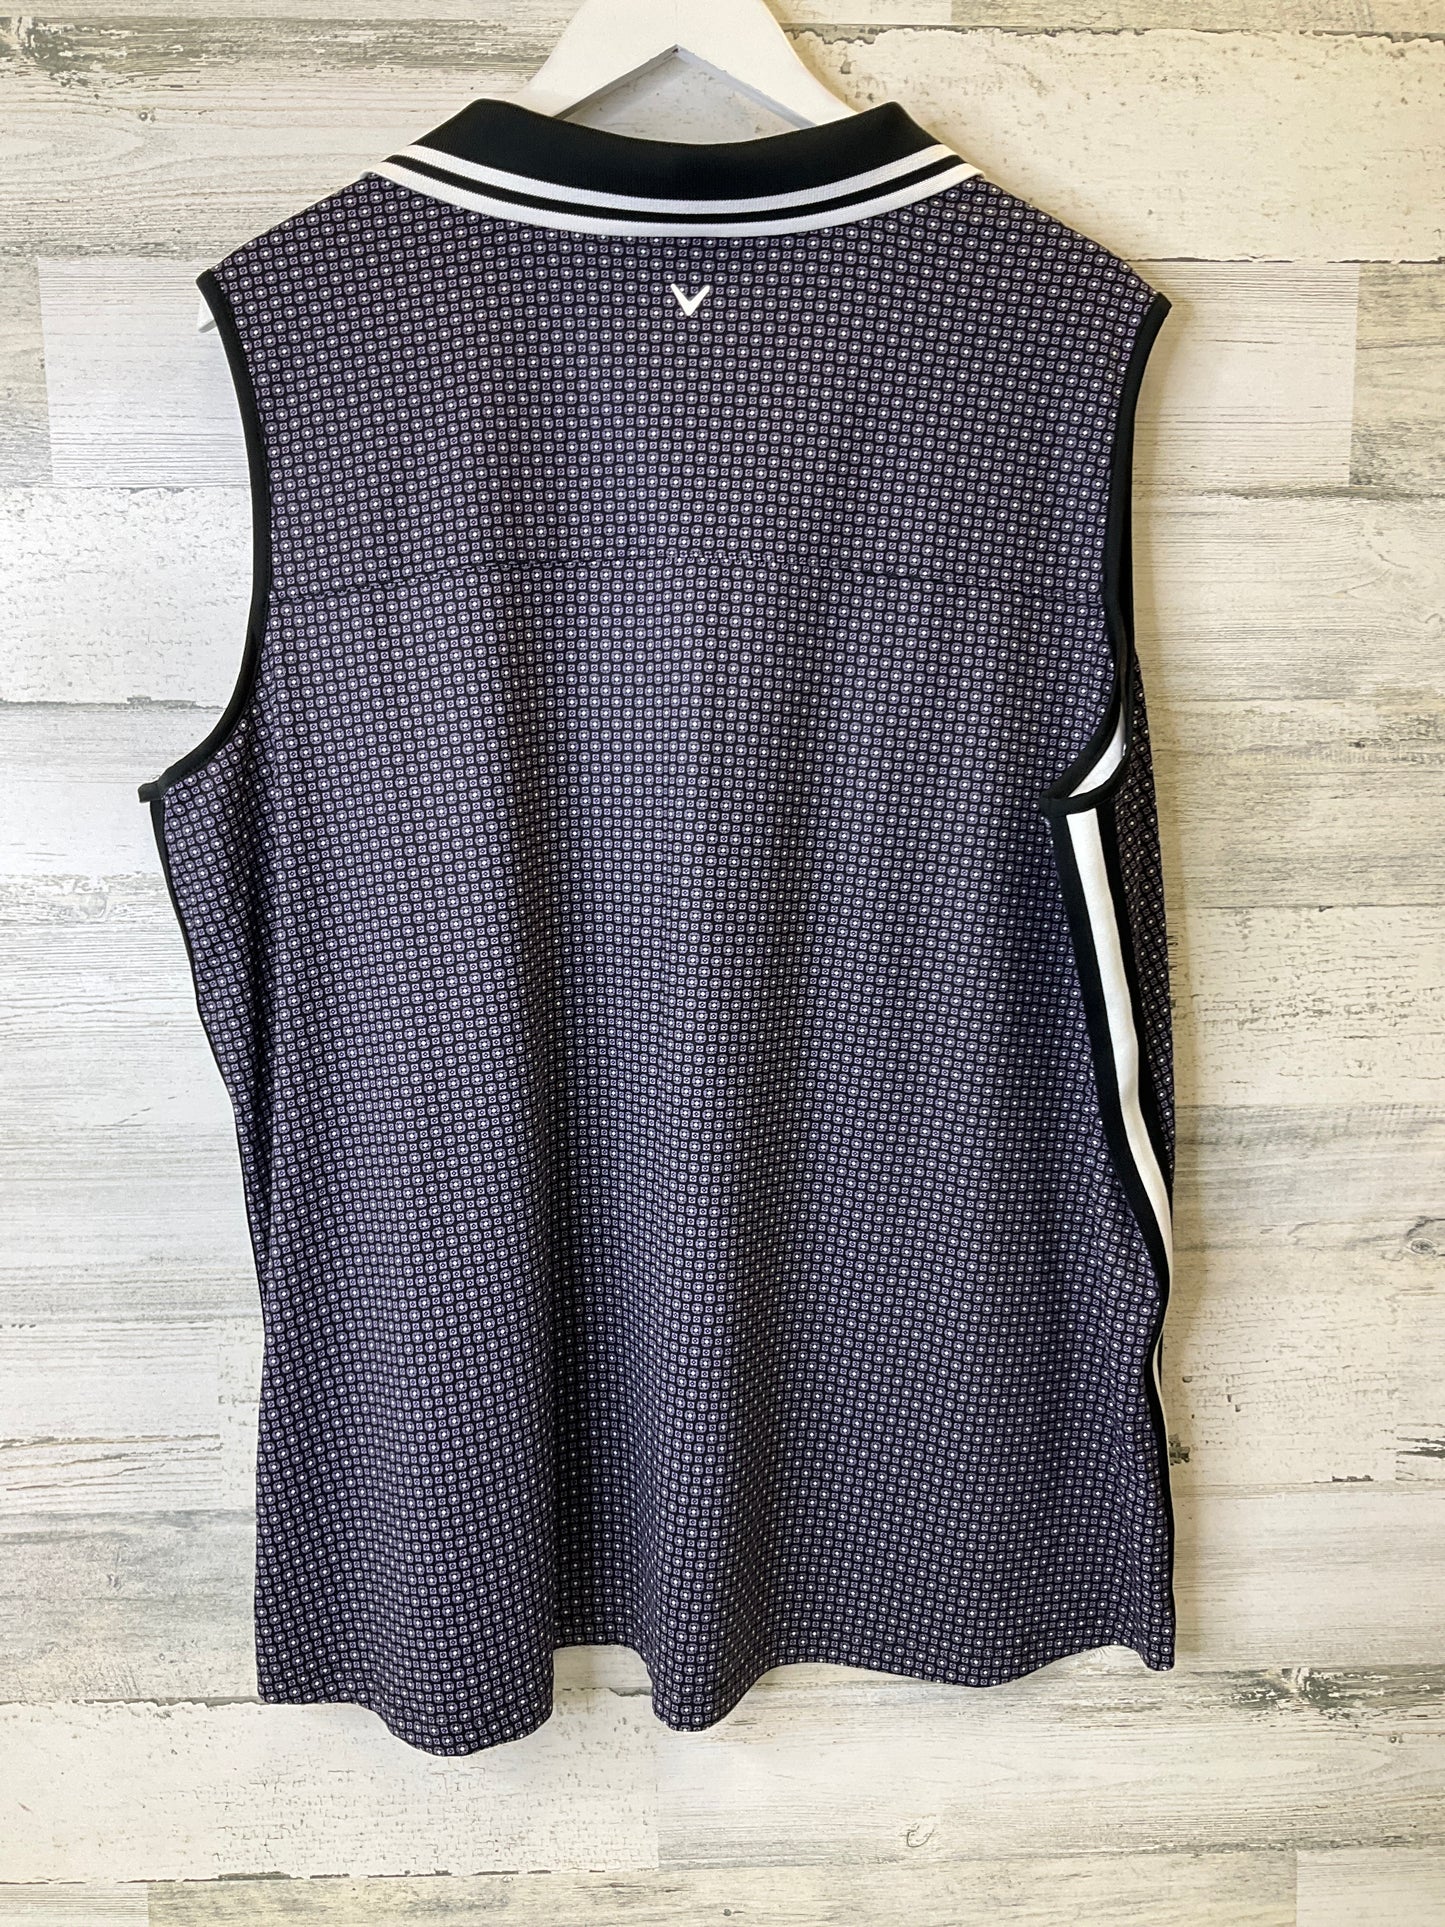 Athletic Tank Top By Callaway  Size: 3x